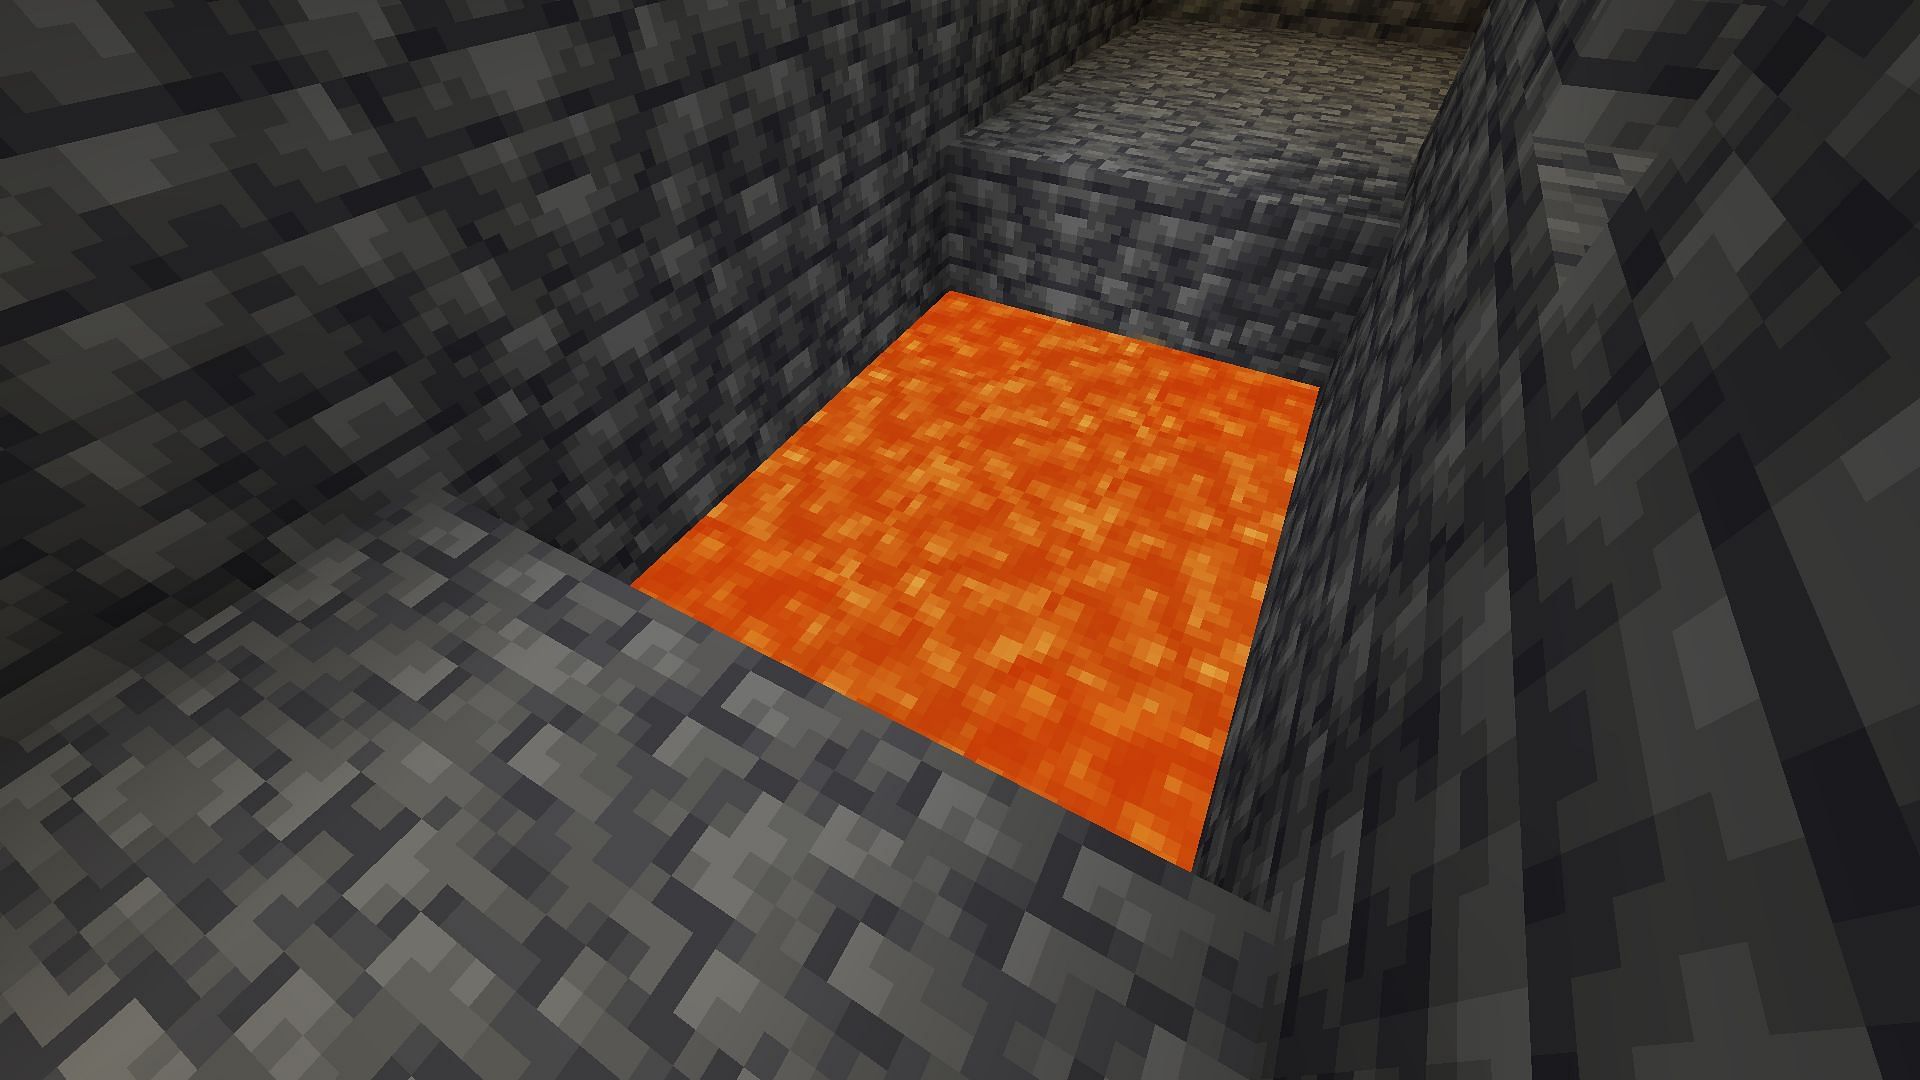 There are a few ways to walk or travel on lava in Minecraft (Image via Mojang)